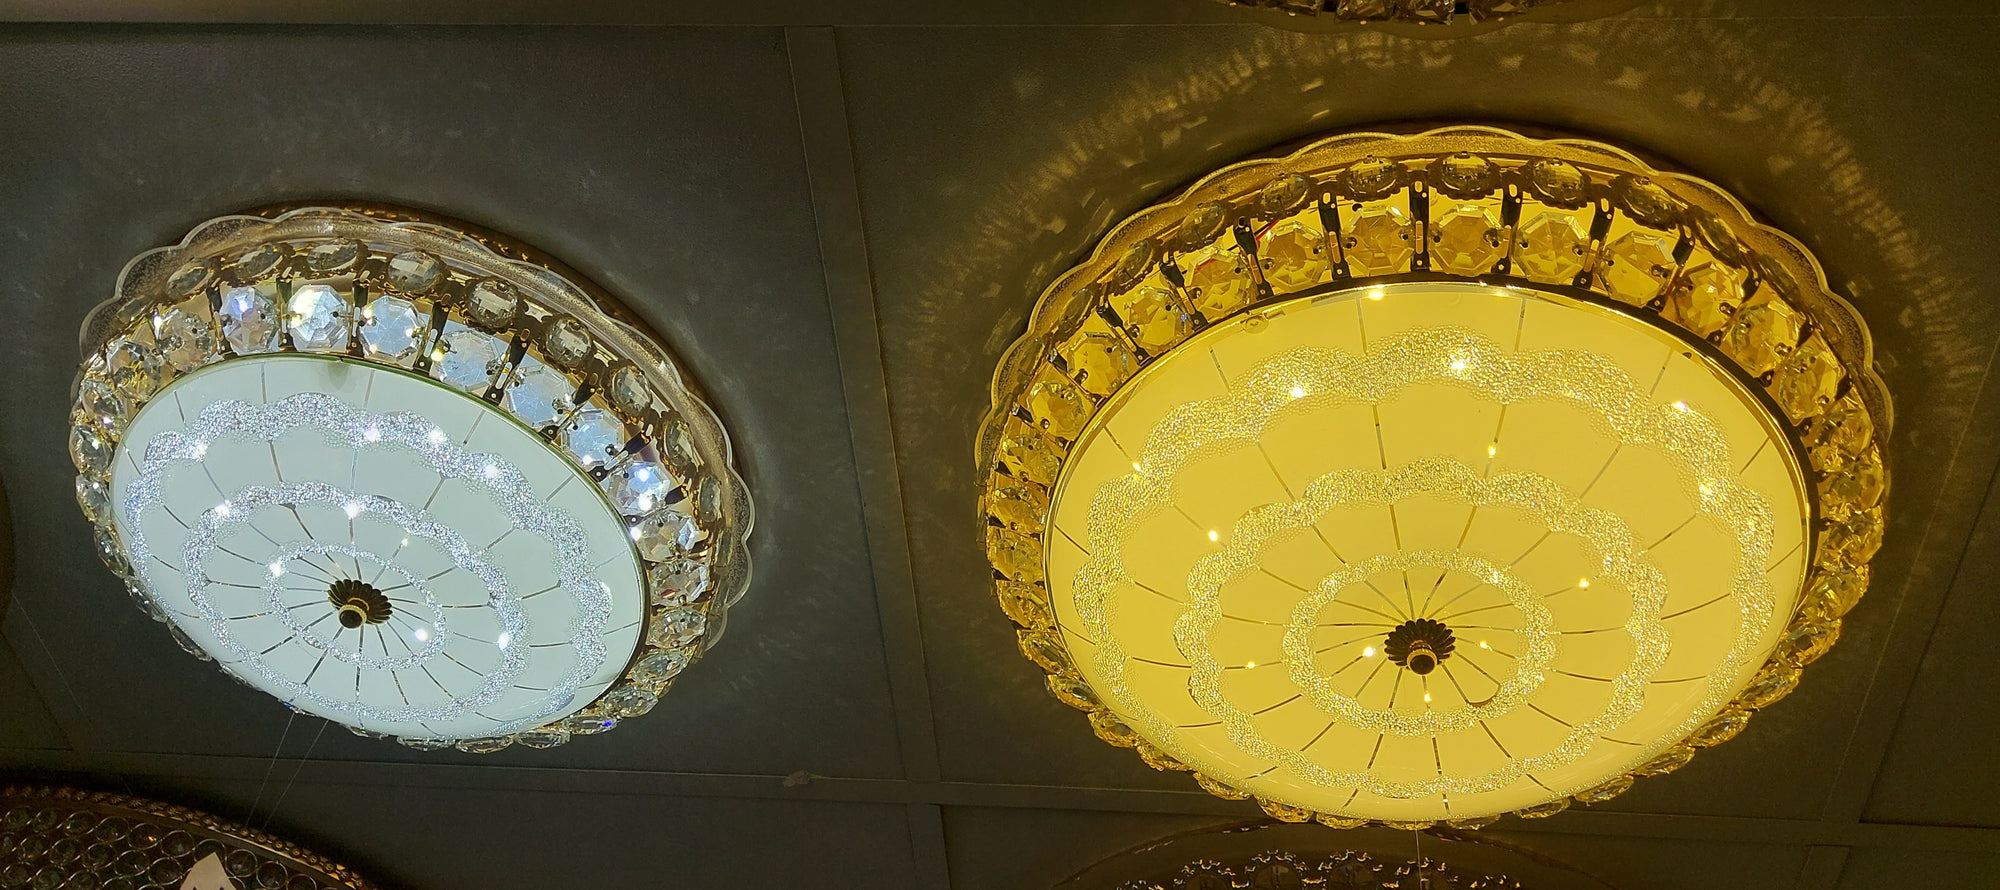 Circular glass ceiling mounted crystallic shaded light-with Colour Changing Function-723/500-51*51 & 723/400-41*41